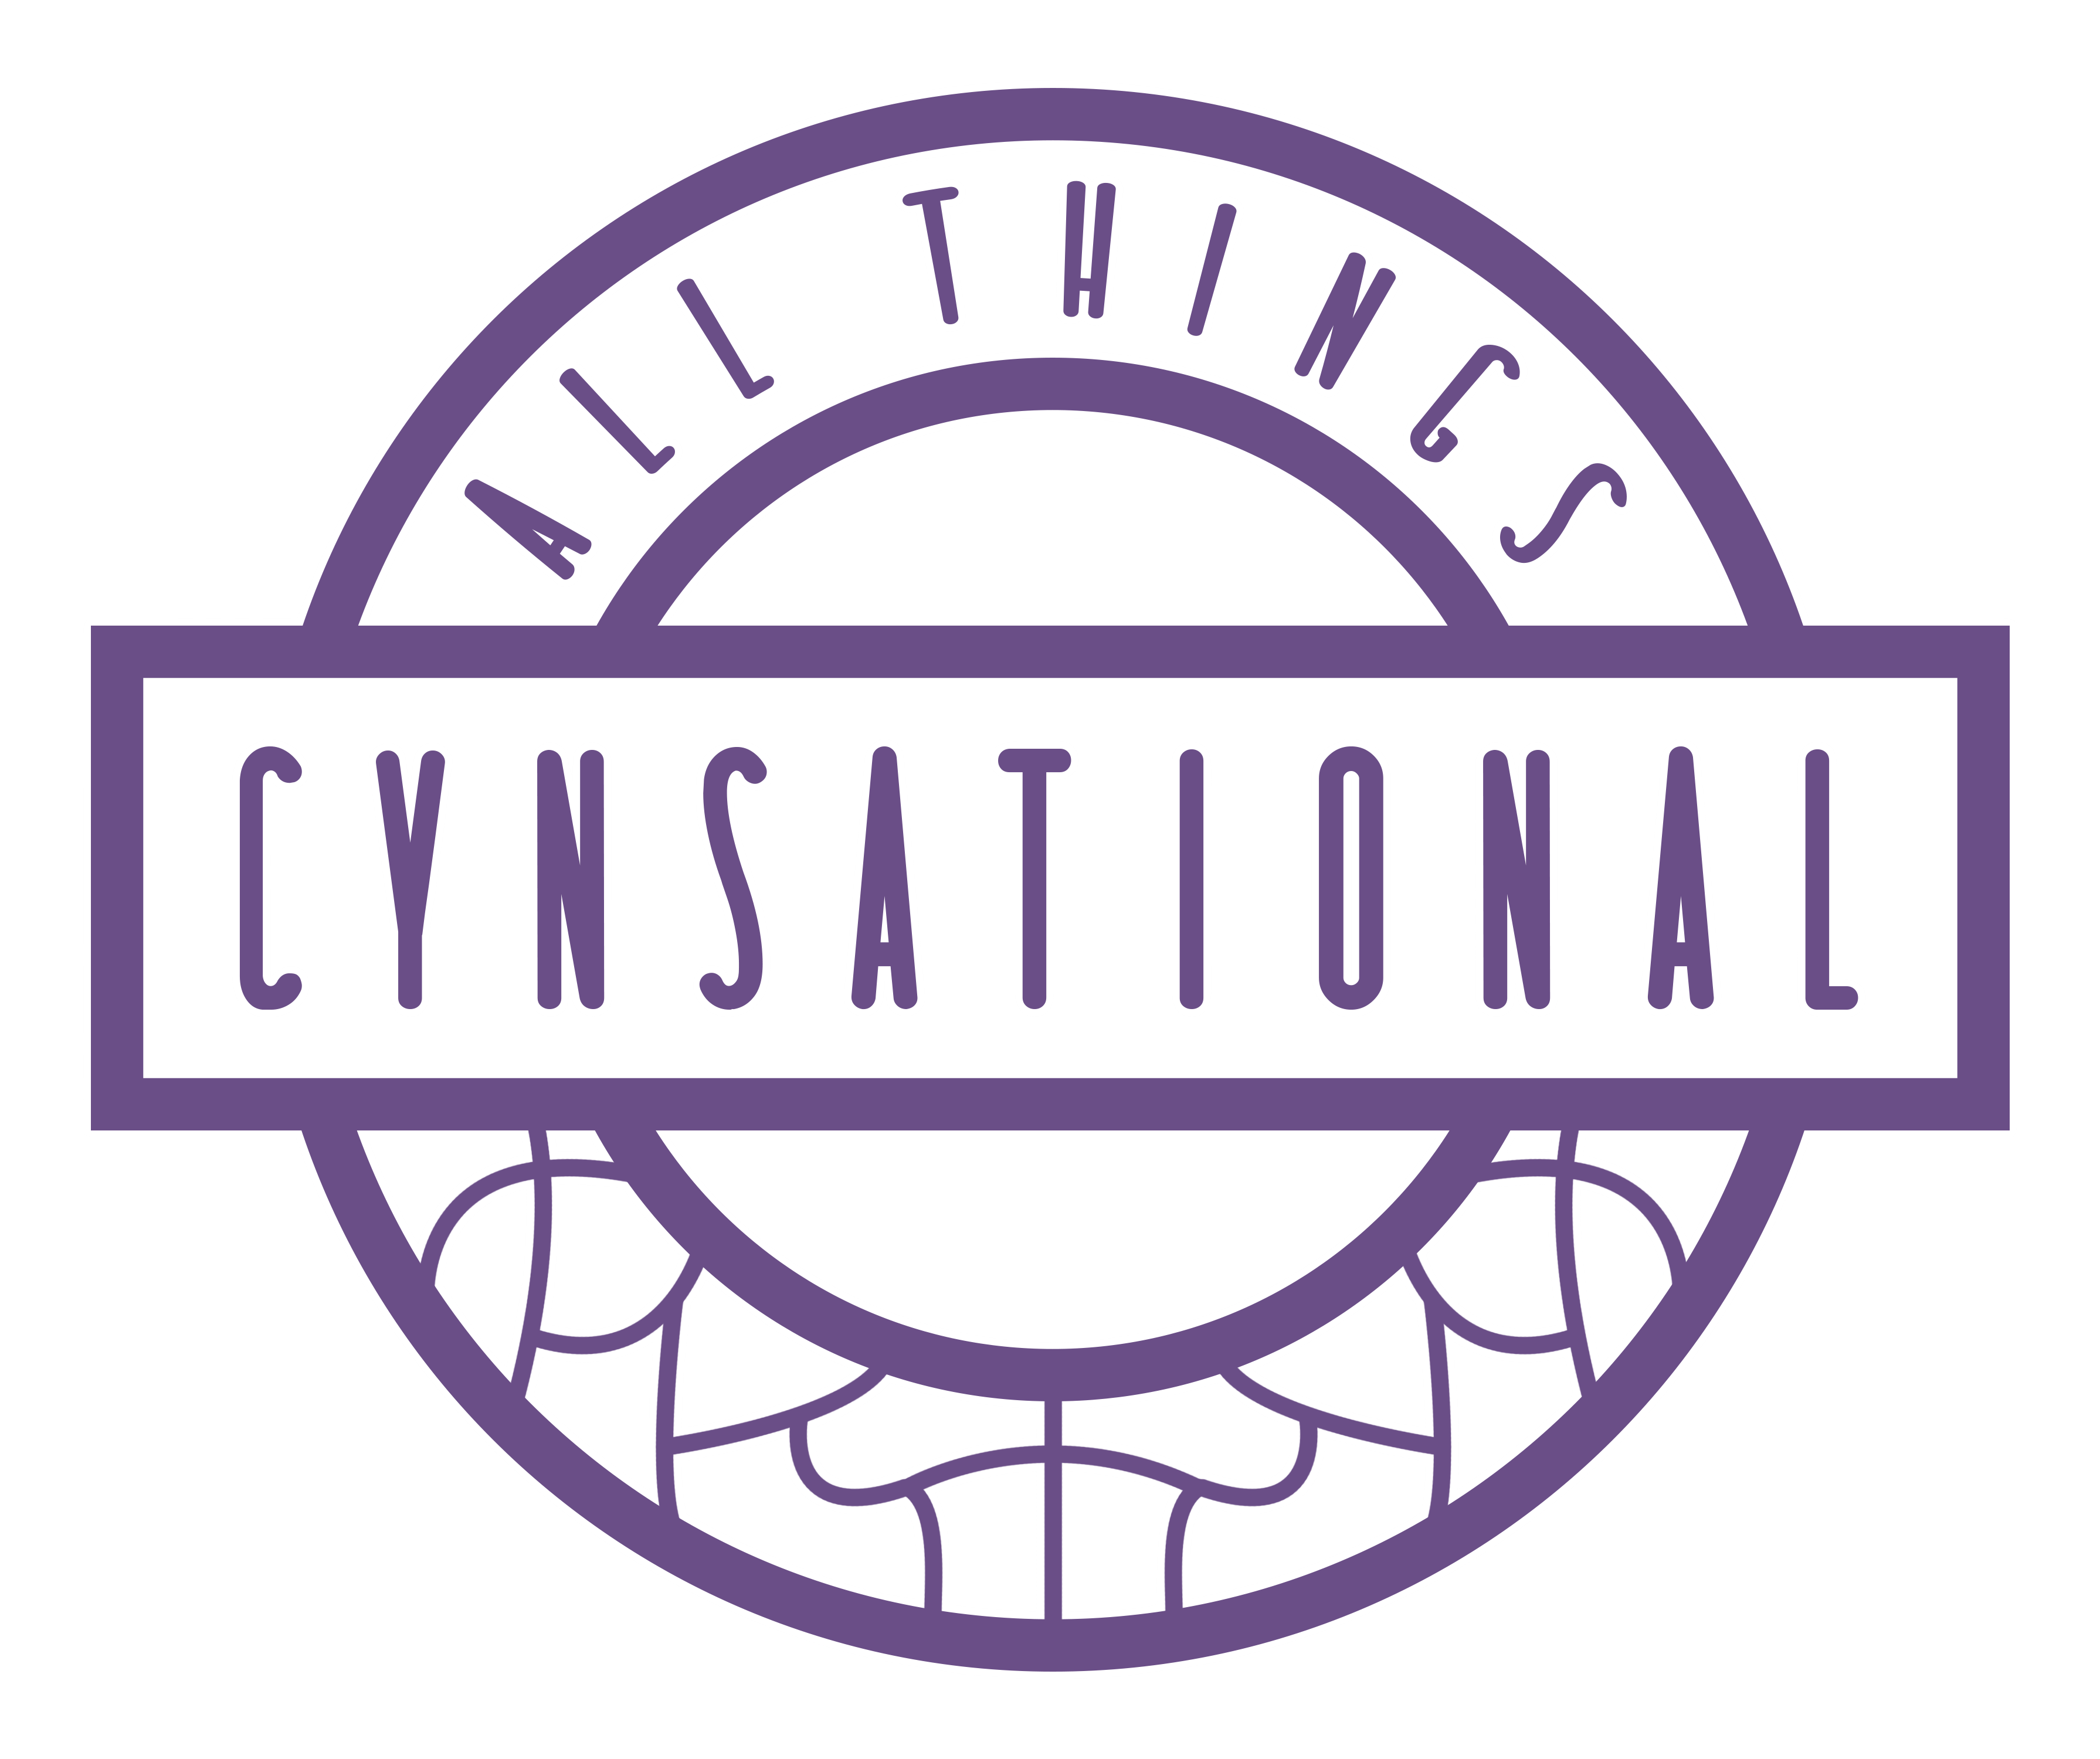 All Things Cynsational